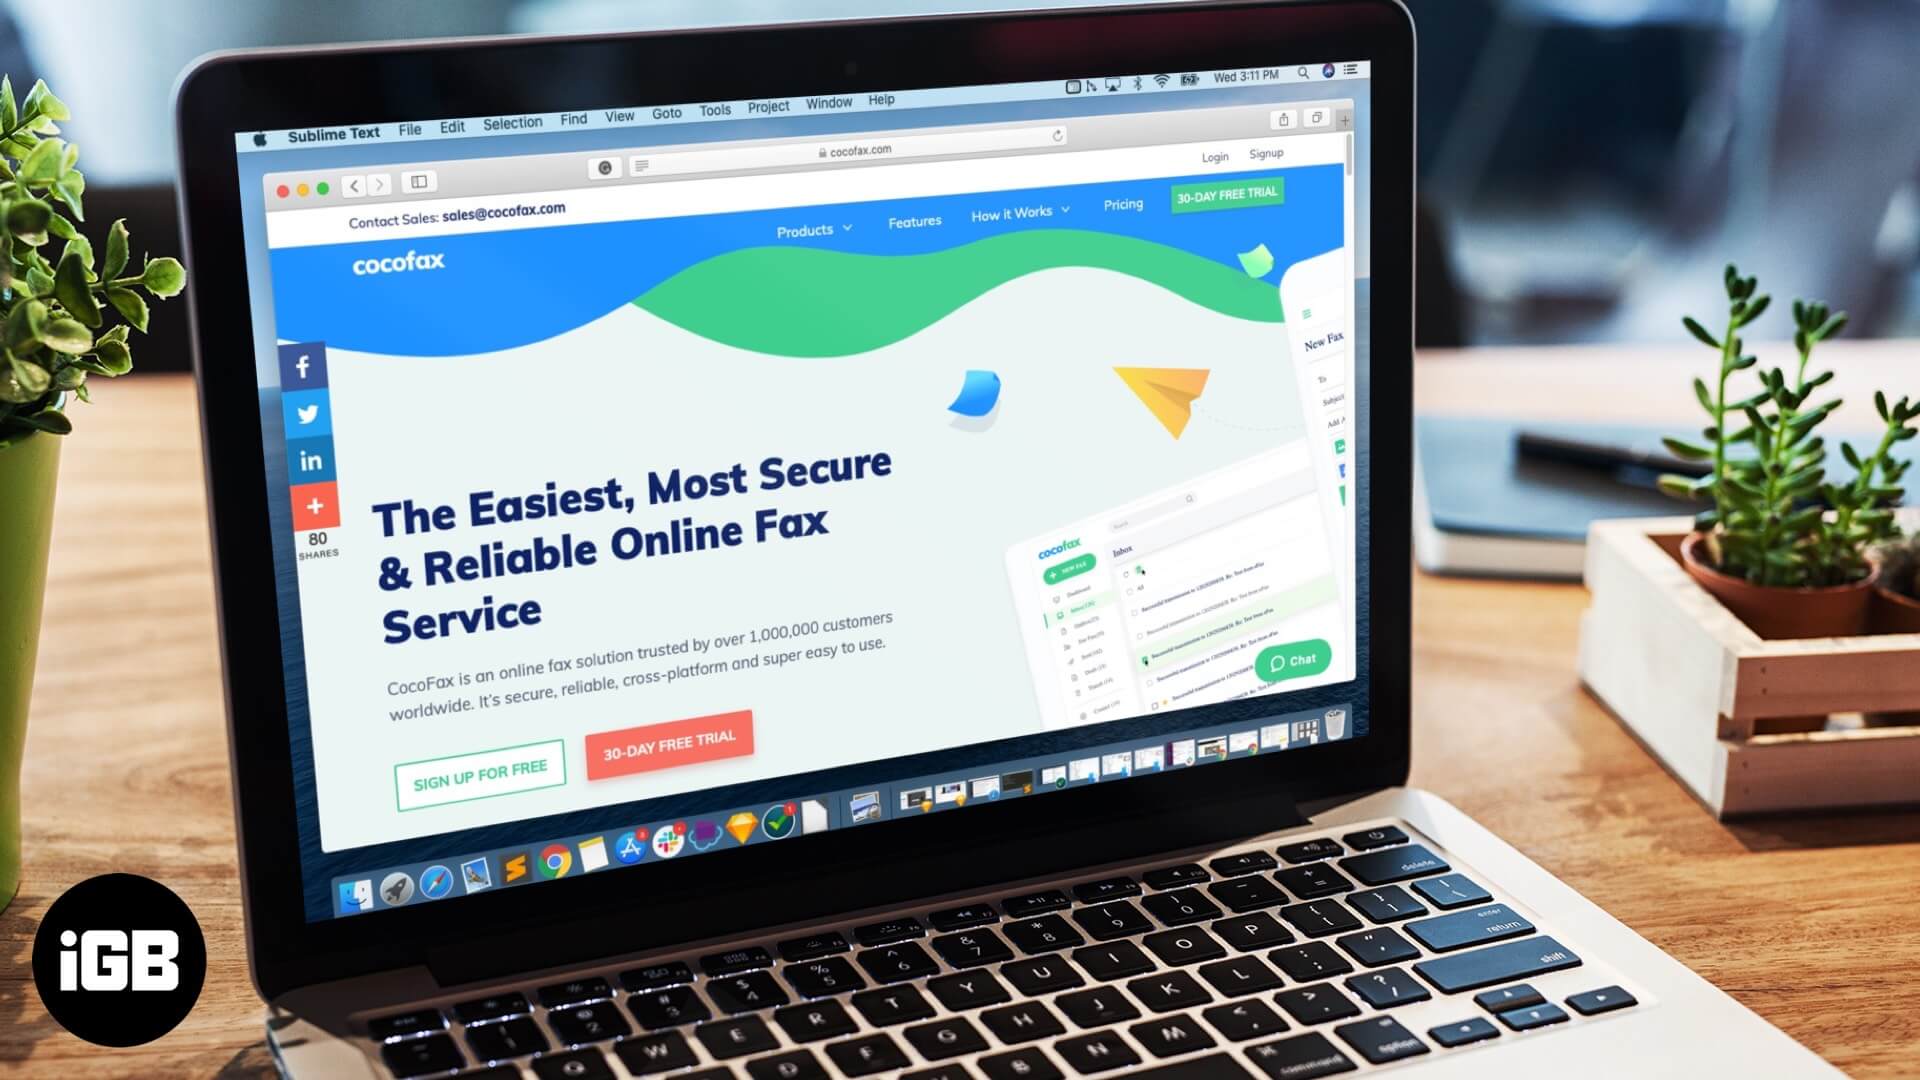 google fax send and receive faxes from gmail, google docs, sheets, drive